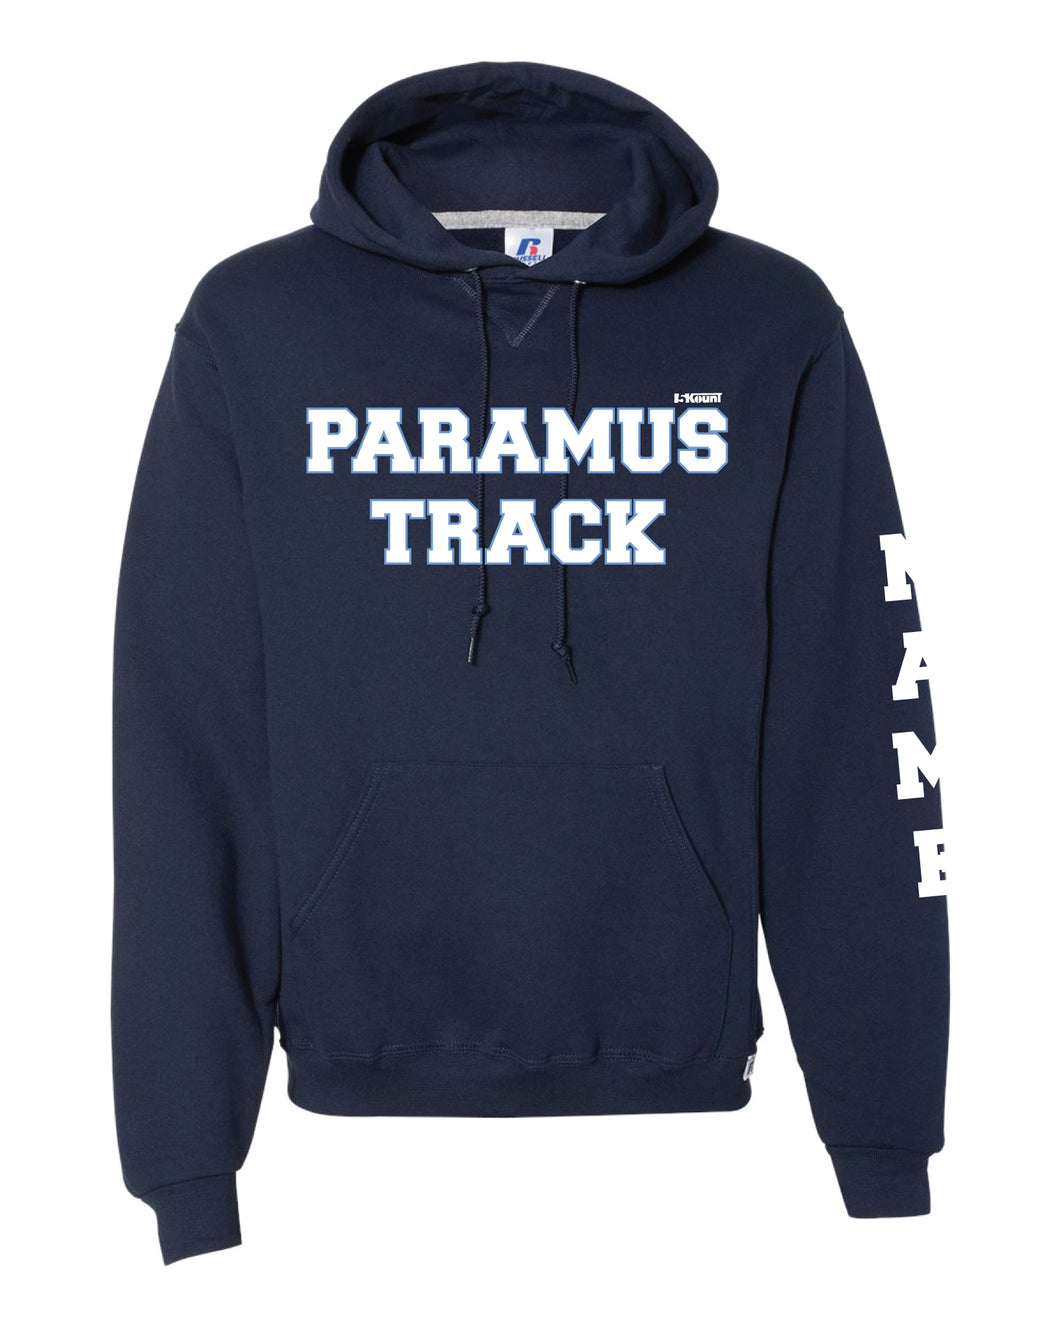 Paramus Track Russell Athletic Cotton Hoodie - Navy - 5KounT2018